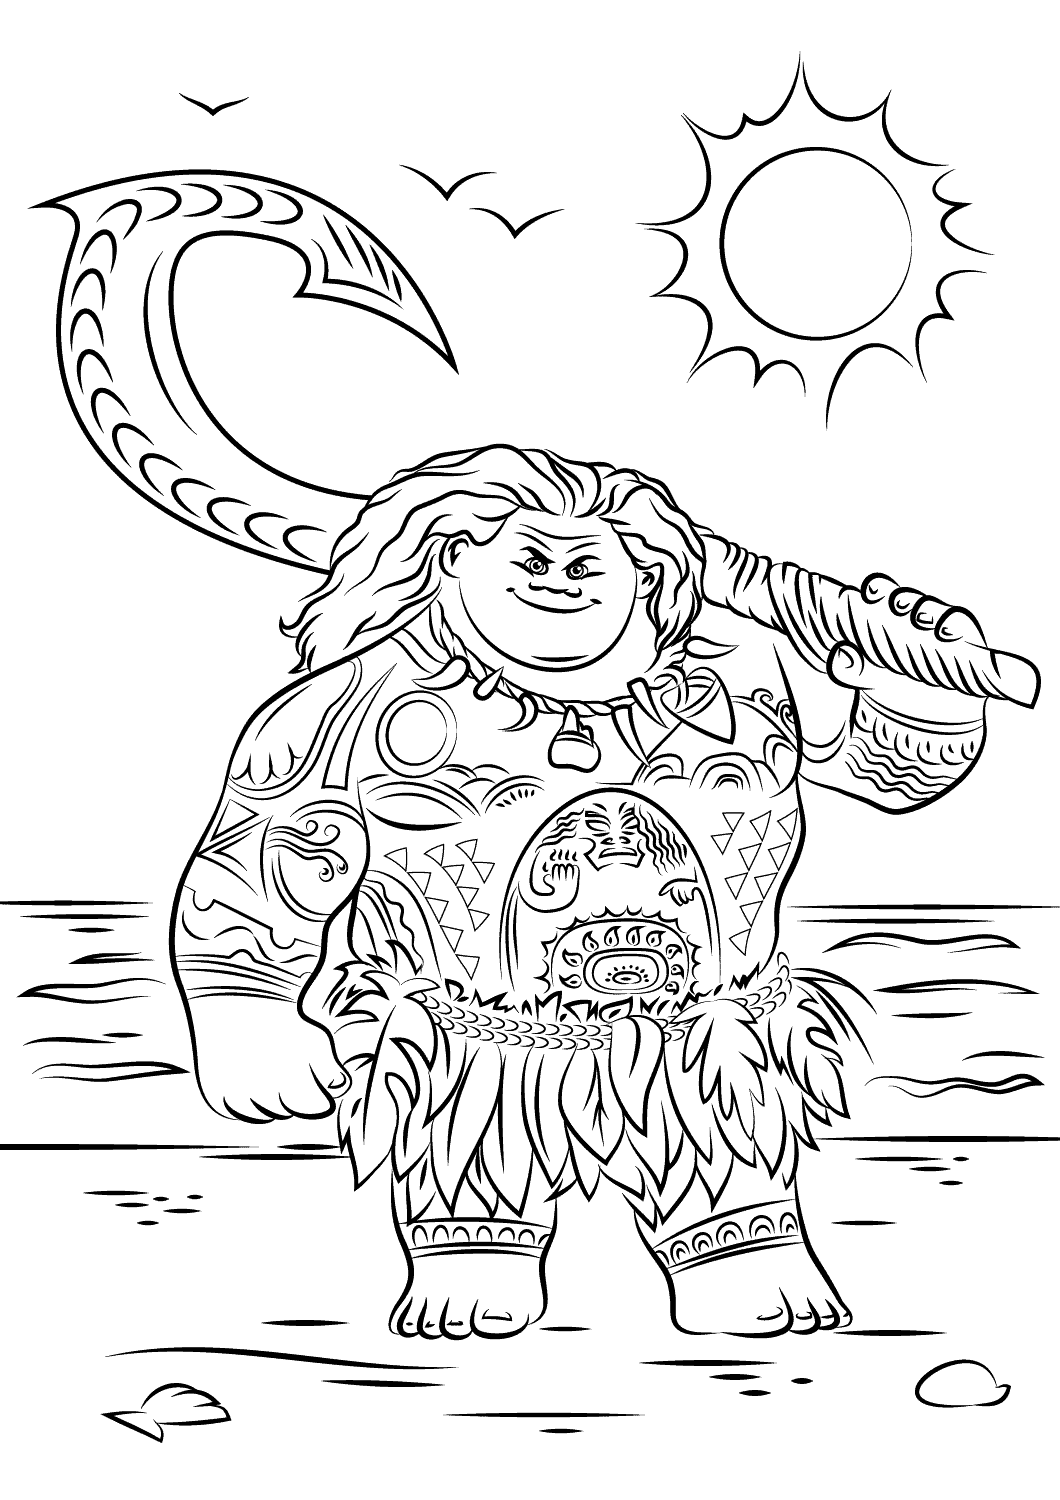 Click to see printable version of Maui de Moana Coloring page